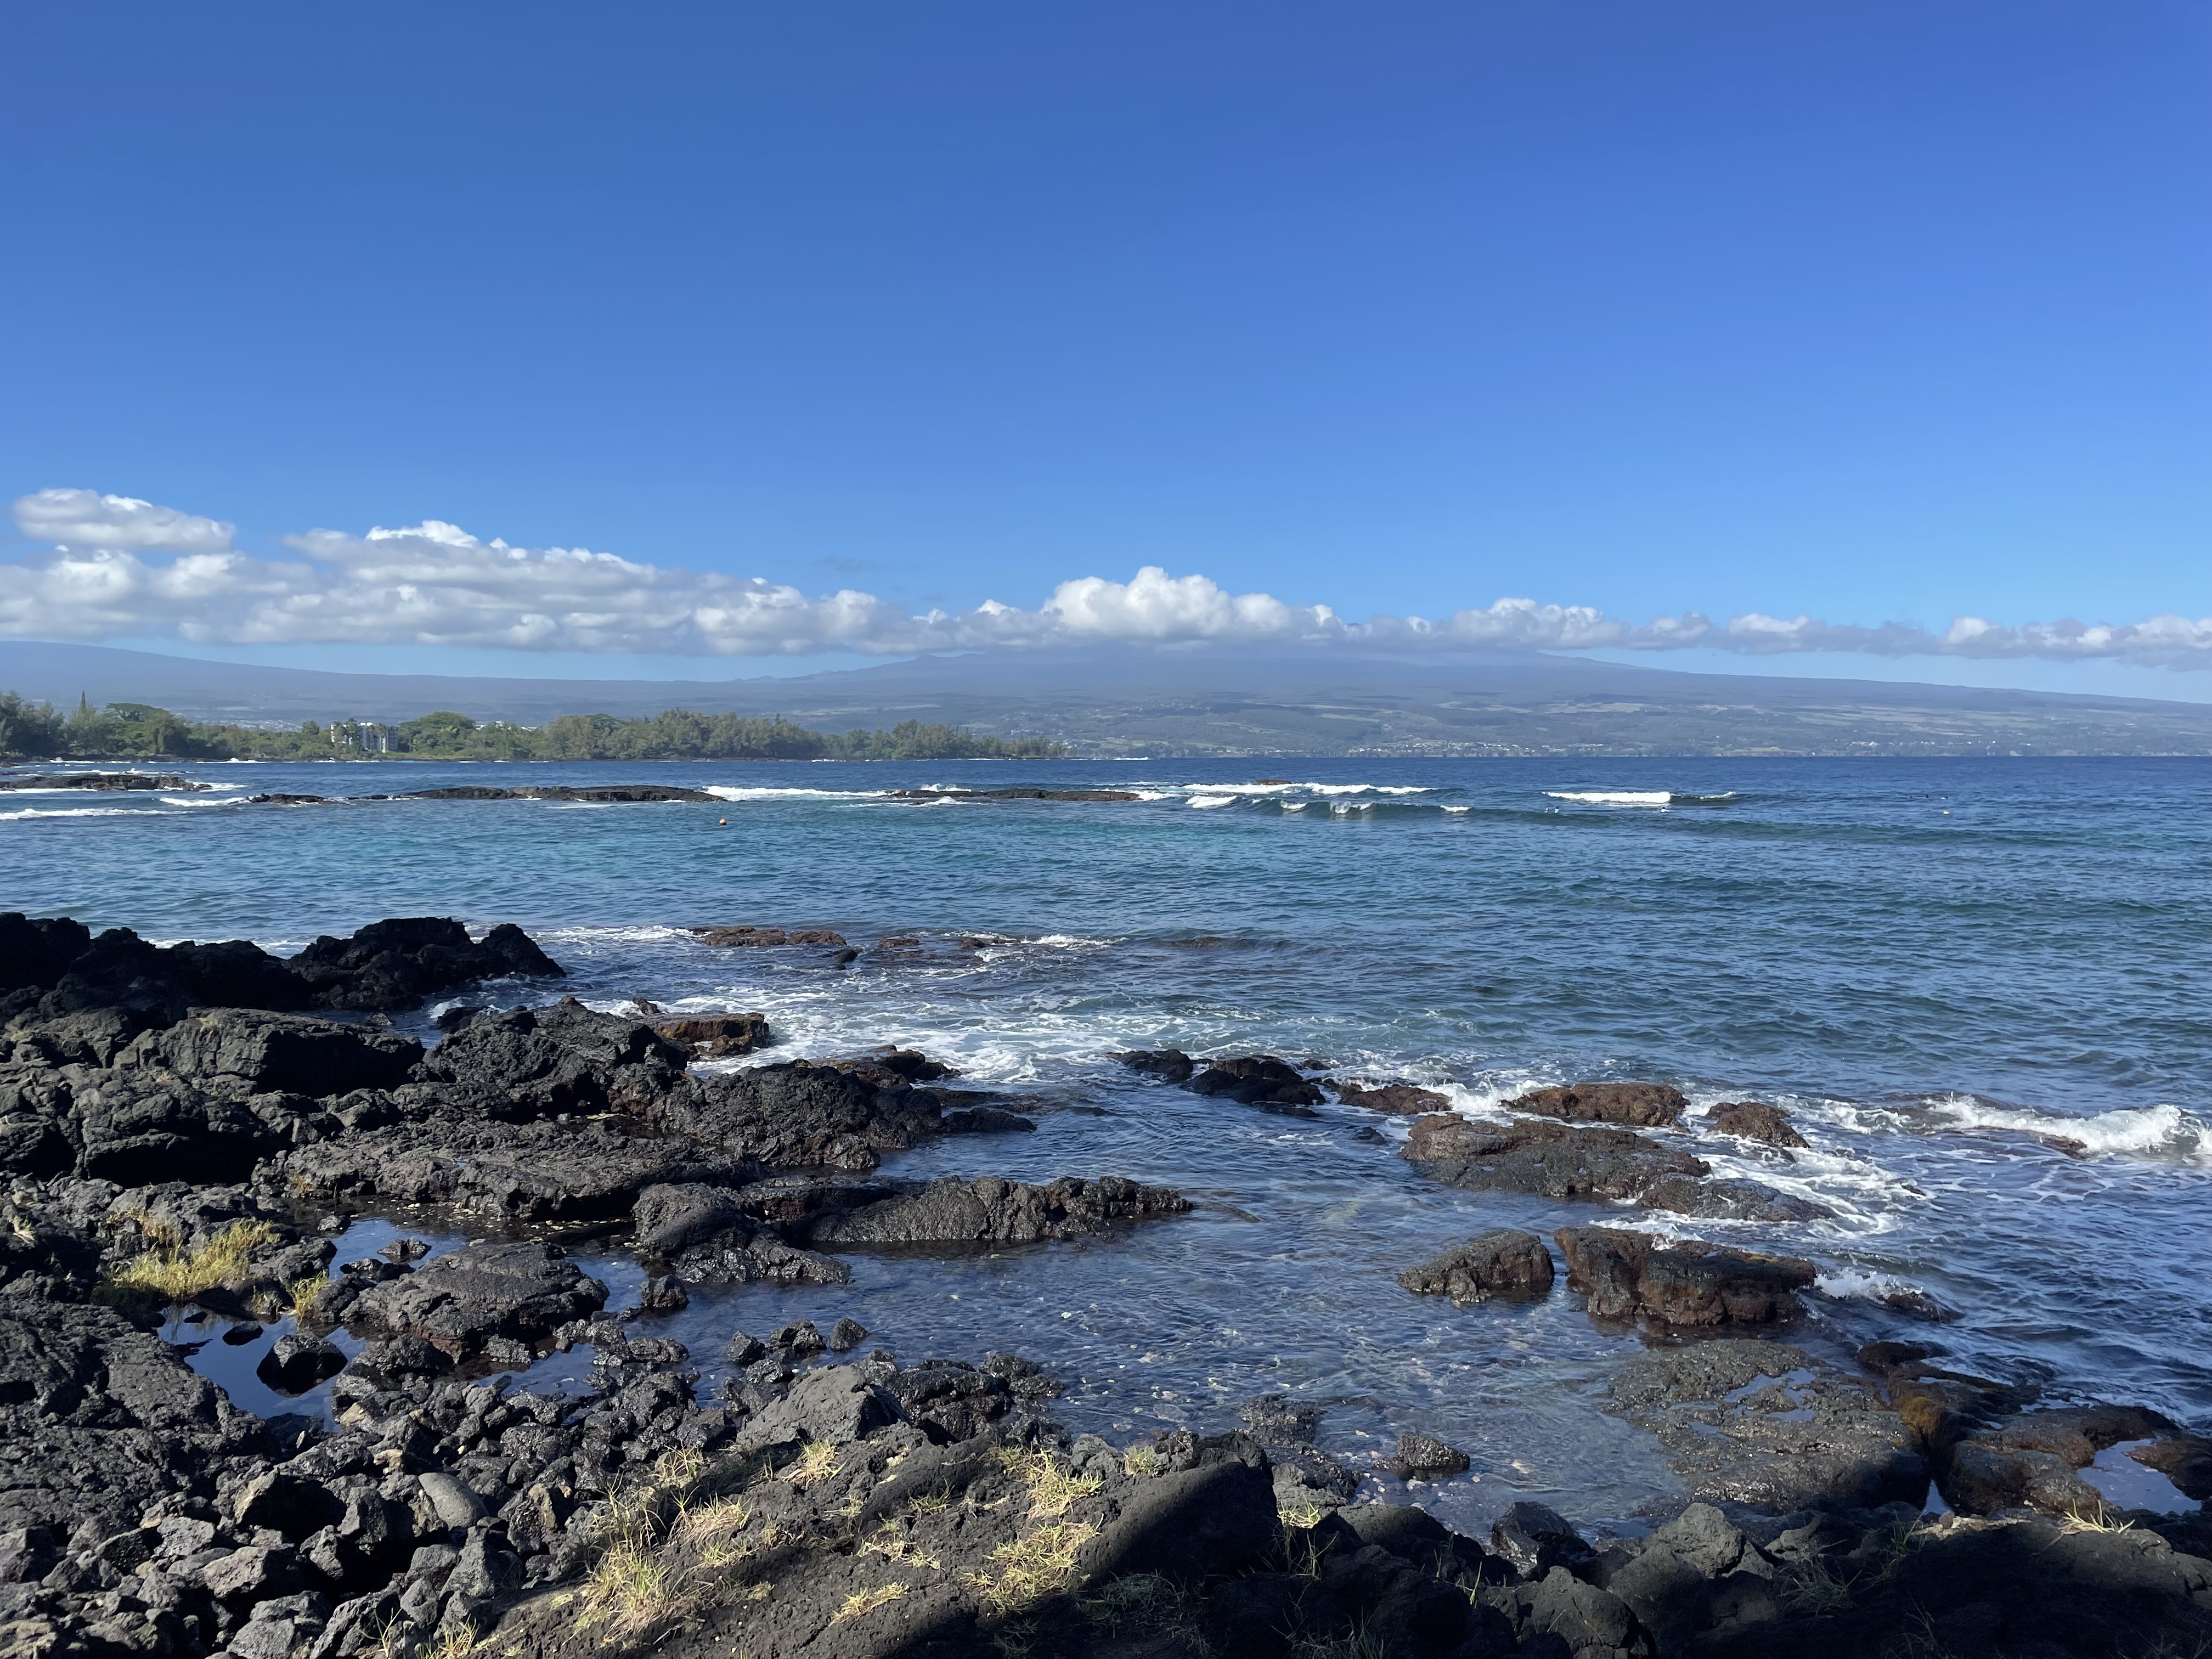 View on the Hilo side